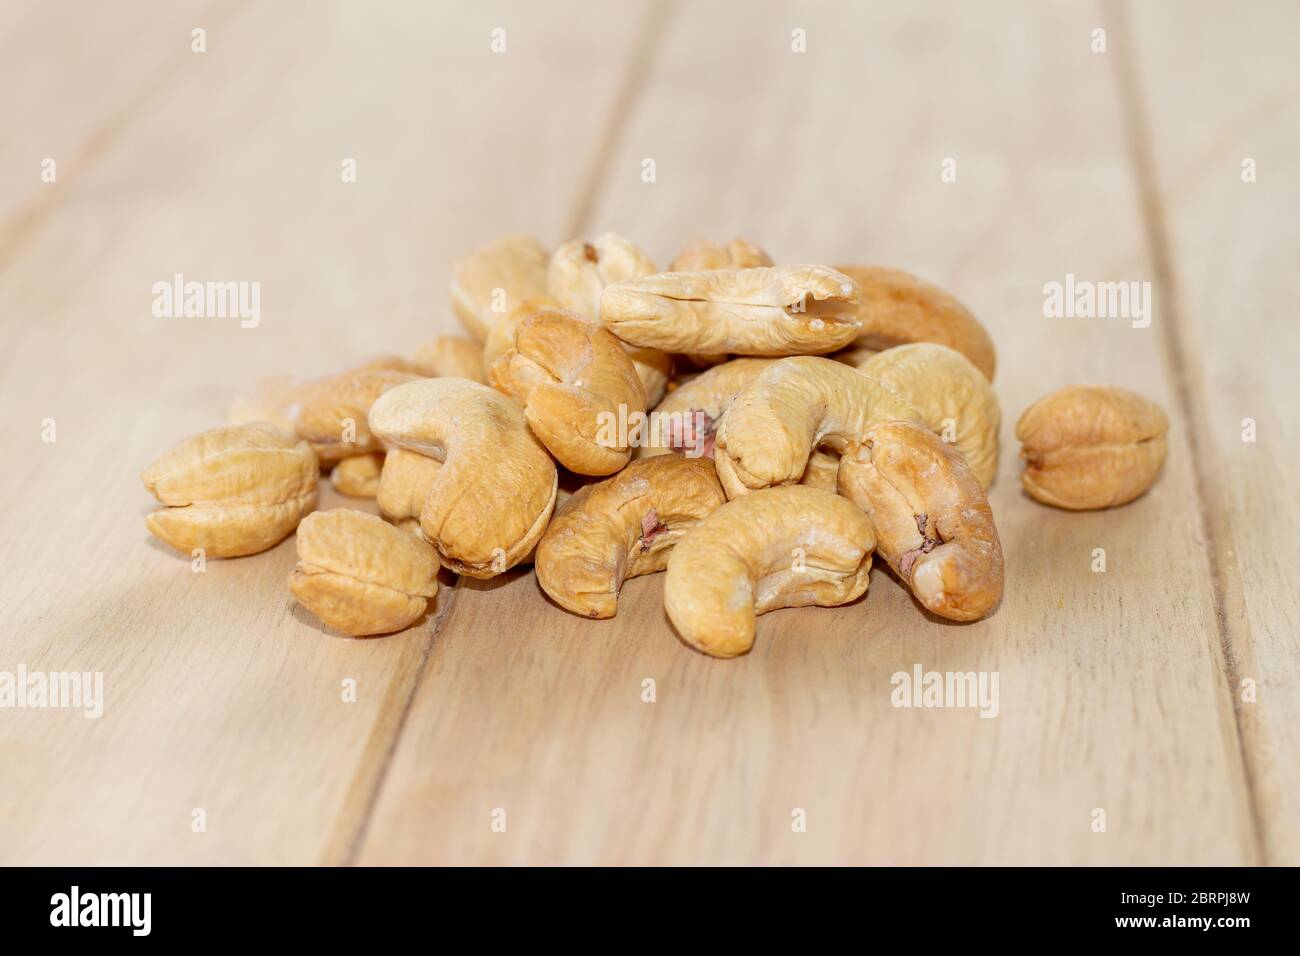 Many Roasted salted cashew nuts  on wooden background Stock Photo